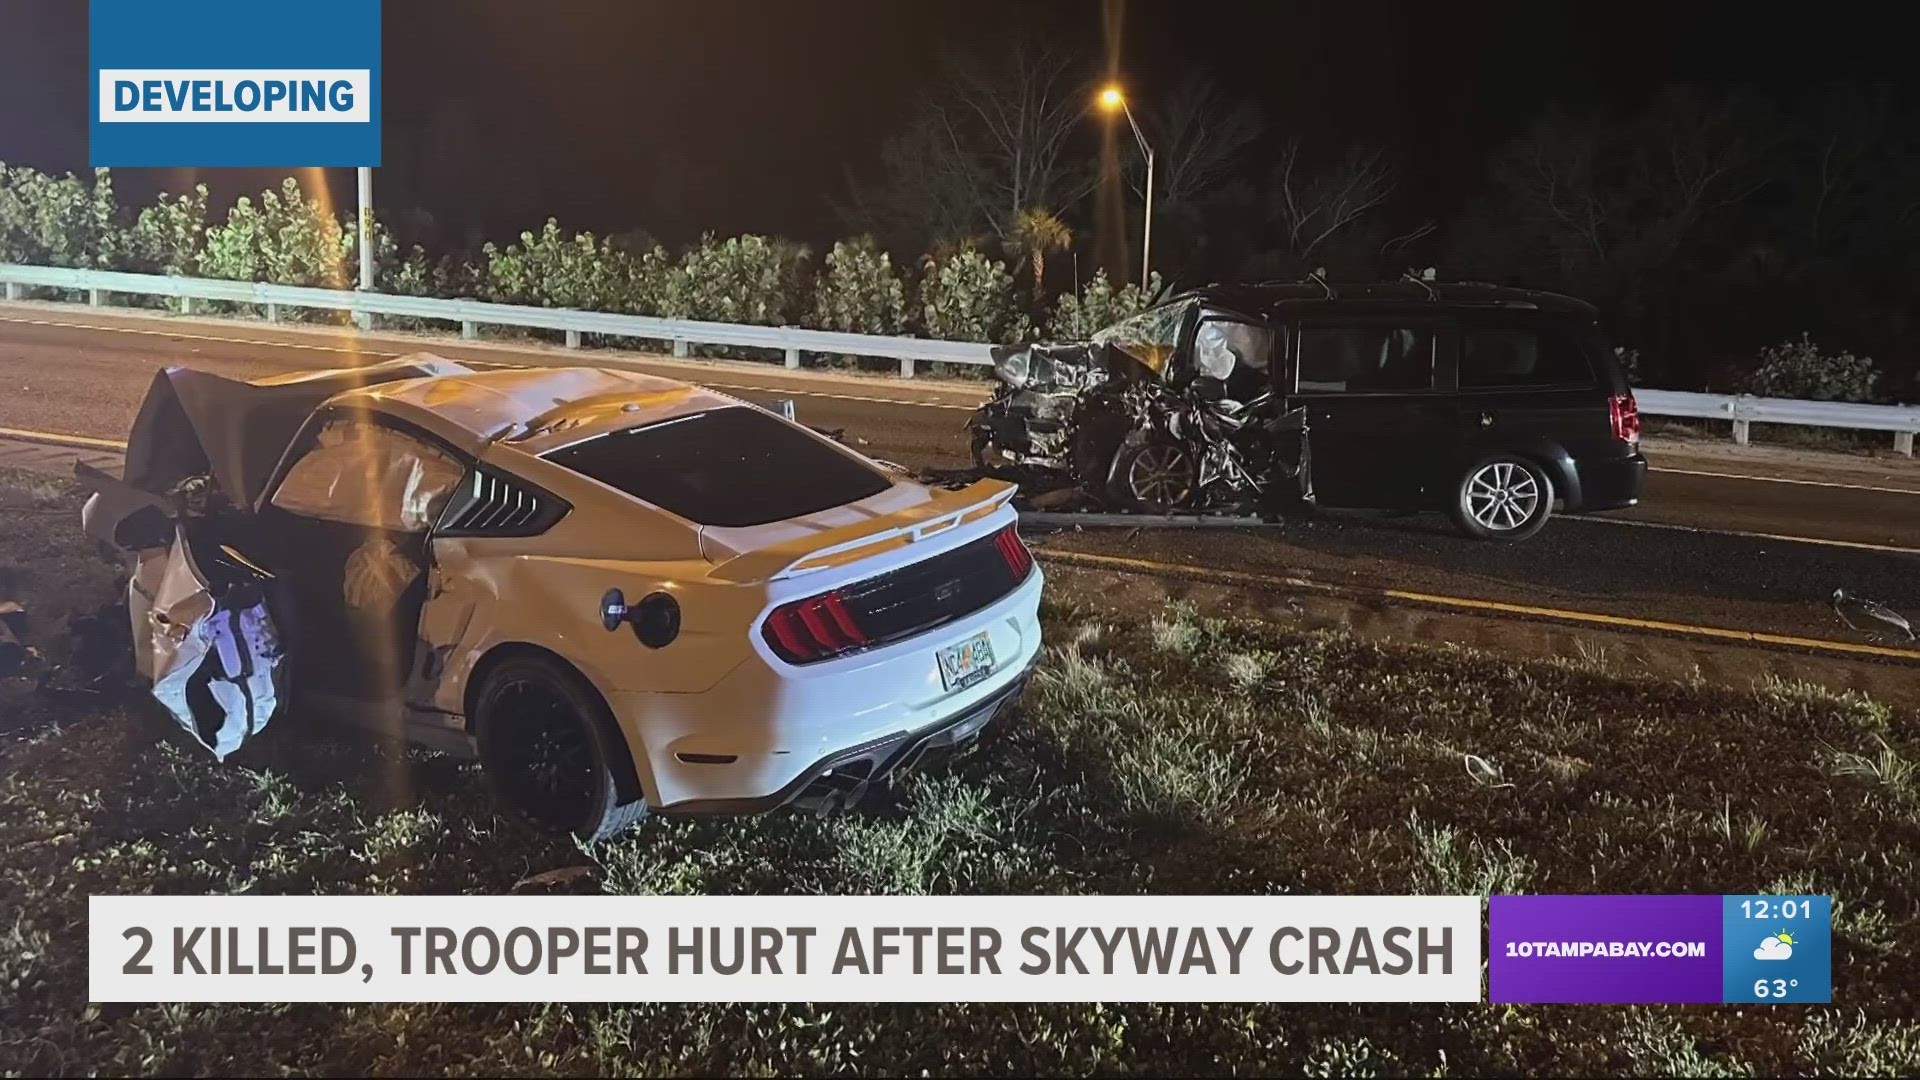 Troopers say the wrong-way driver stole a Mustang and was trying to get away from authorities. The resulting crash shut down the bridge overnight into the morning.